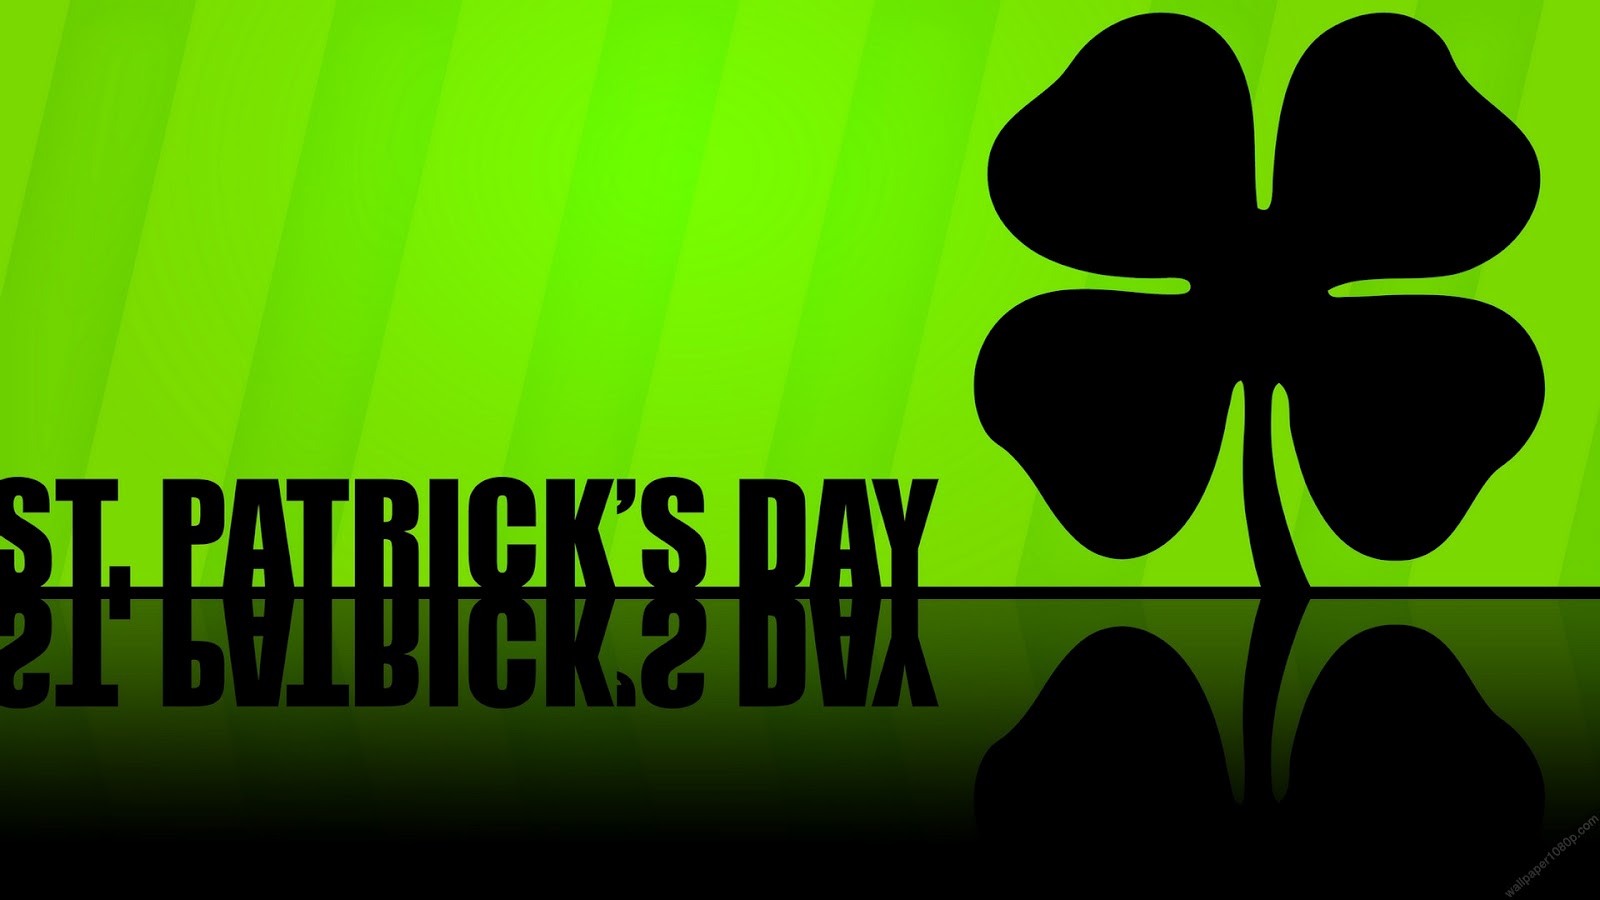 Free WallPapers for St Patricks Day Lets Celebrate